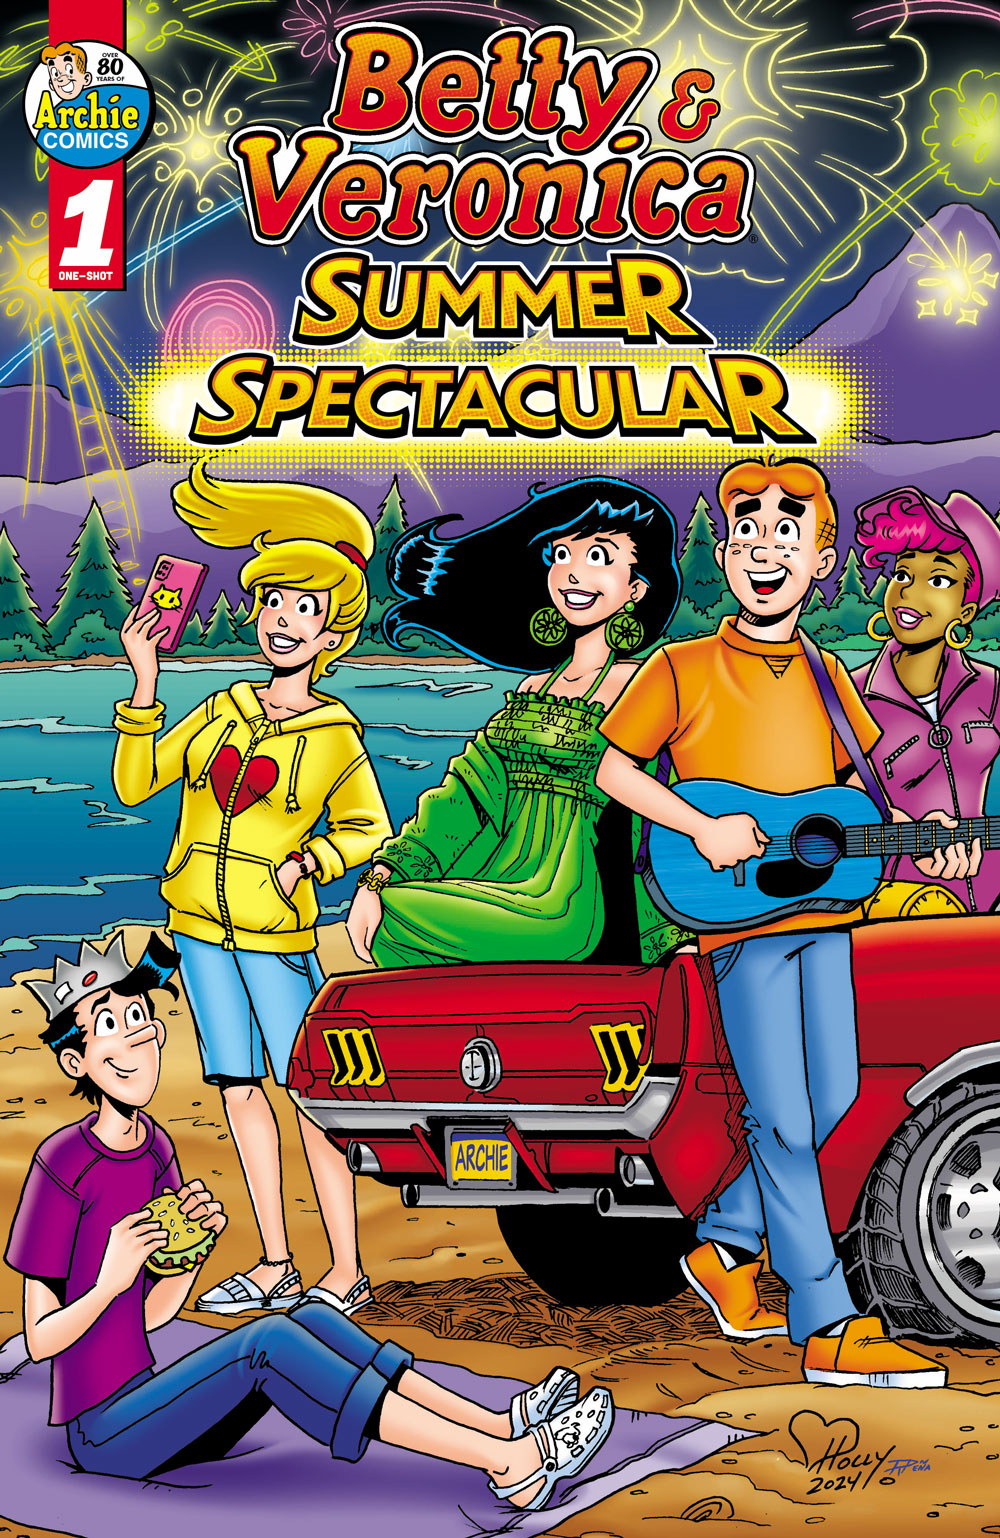 Jughead, Betty, Veronica, Archie, and Eliza Han watch fireworks by a lake, leaning on Archie's classic 1960s car. Jughead sits on the ground eating a hamburger. Betty takes a selfie. Archie plays the guitar.